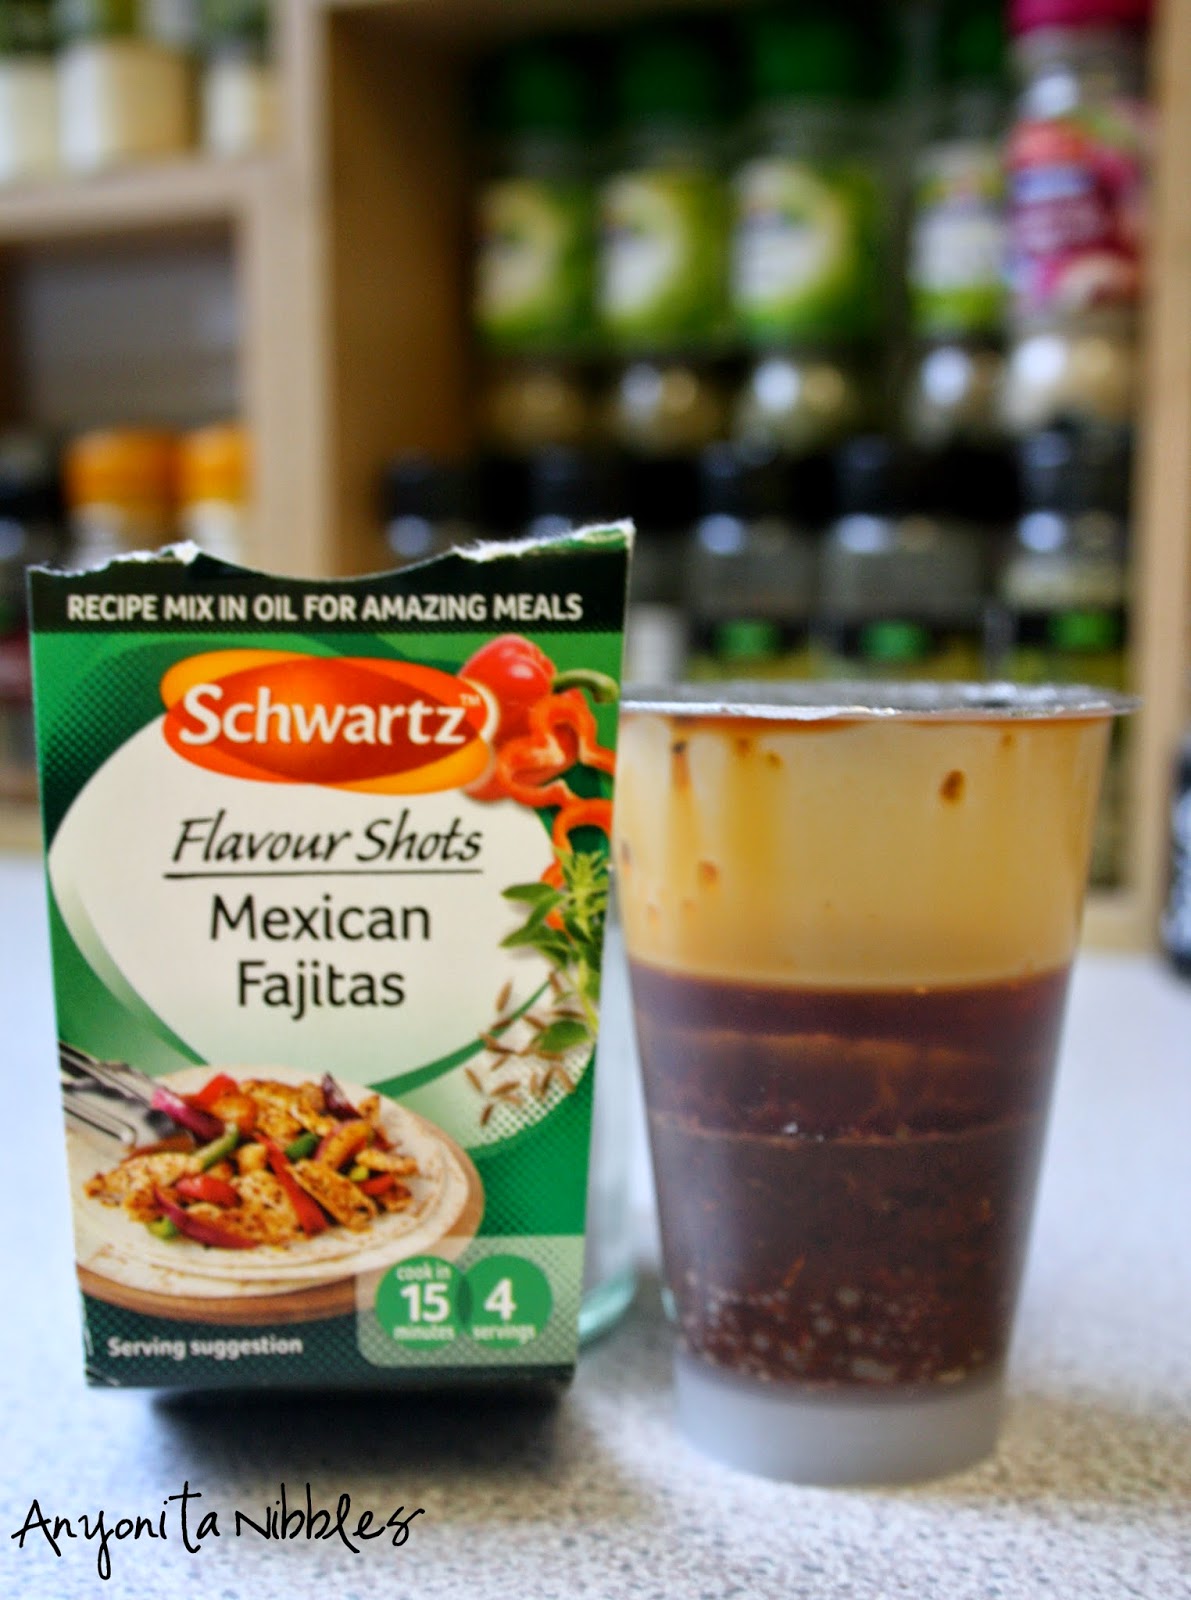 These Flavour Shots contain all the oil and spices you need for an authentic and tasty Mexican dinner